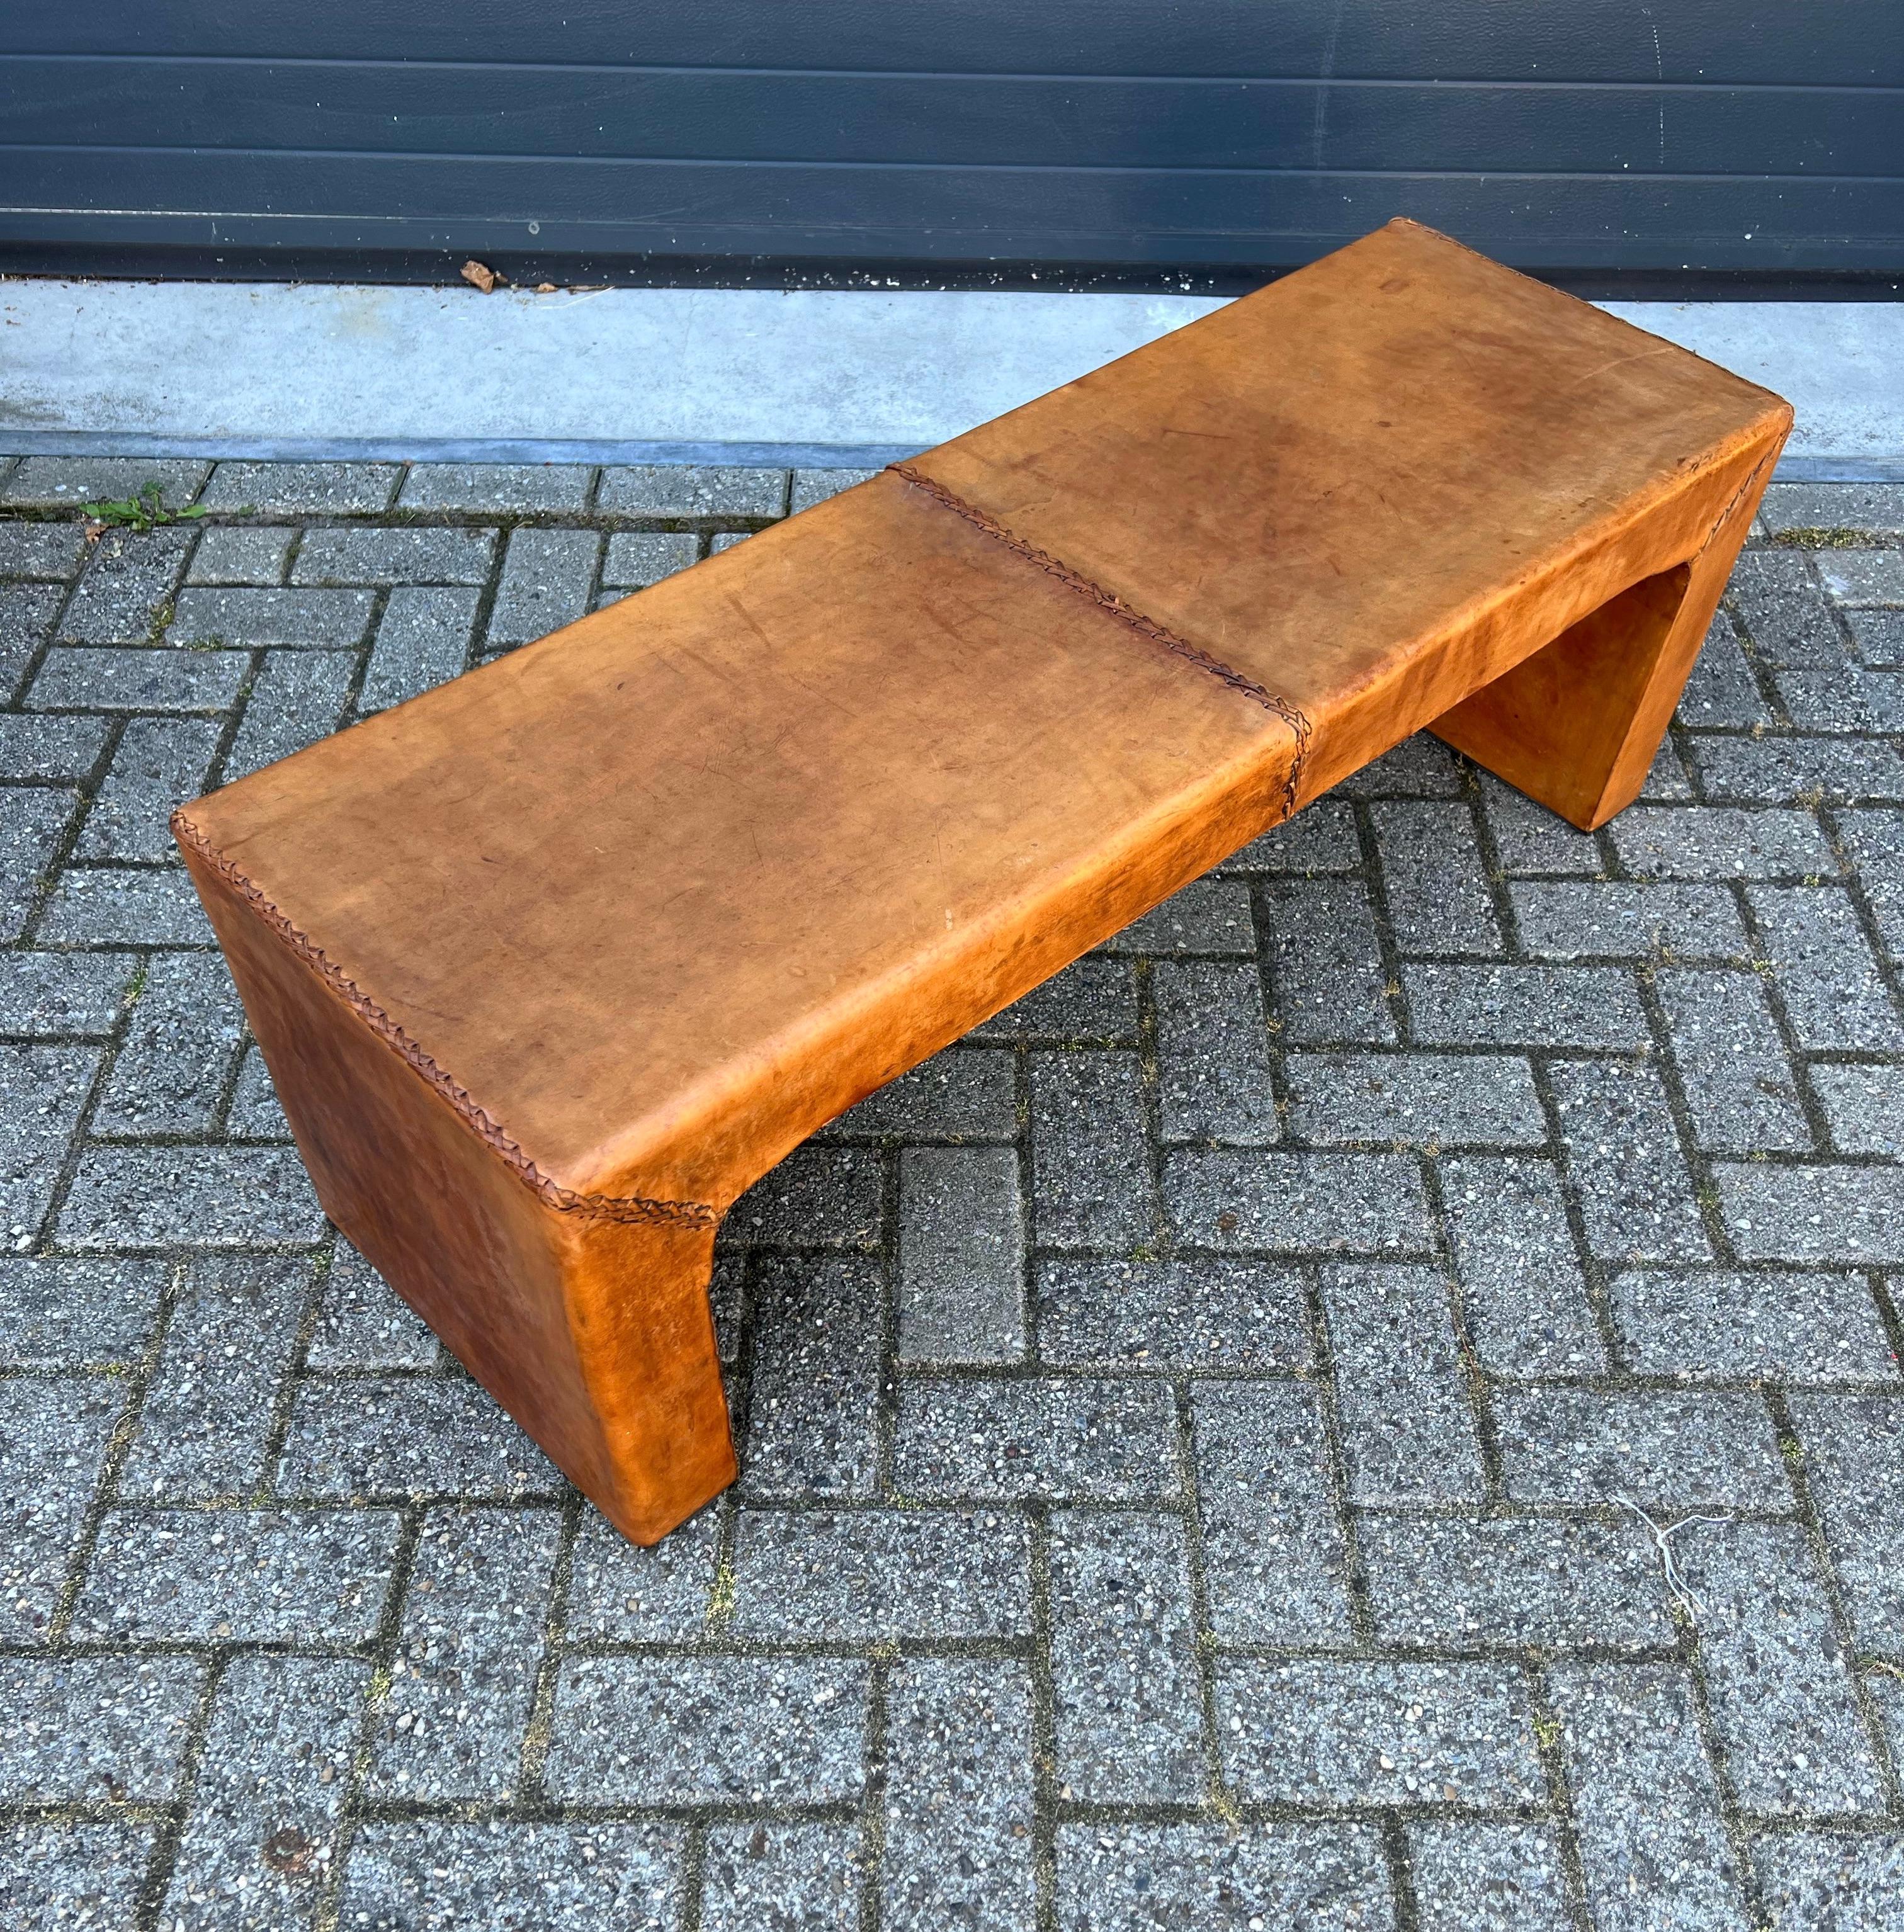 Wonderful design and condition, 1960s hand-crafted leather bench.

This perfectly symmetrical and straight lined bench is in amazingly good condition and it is as stabile as the day it was handmade. This hand woven with leather lace long seat, can